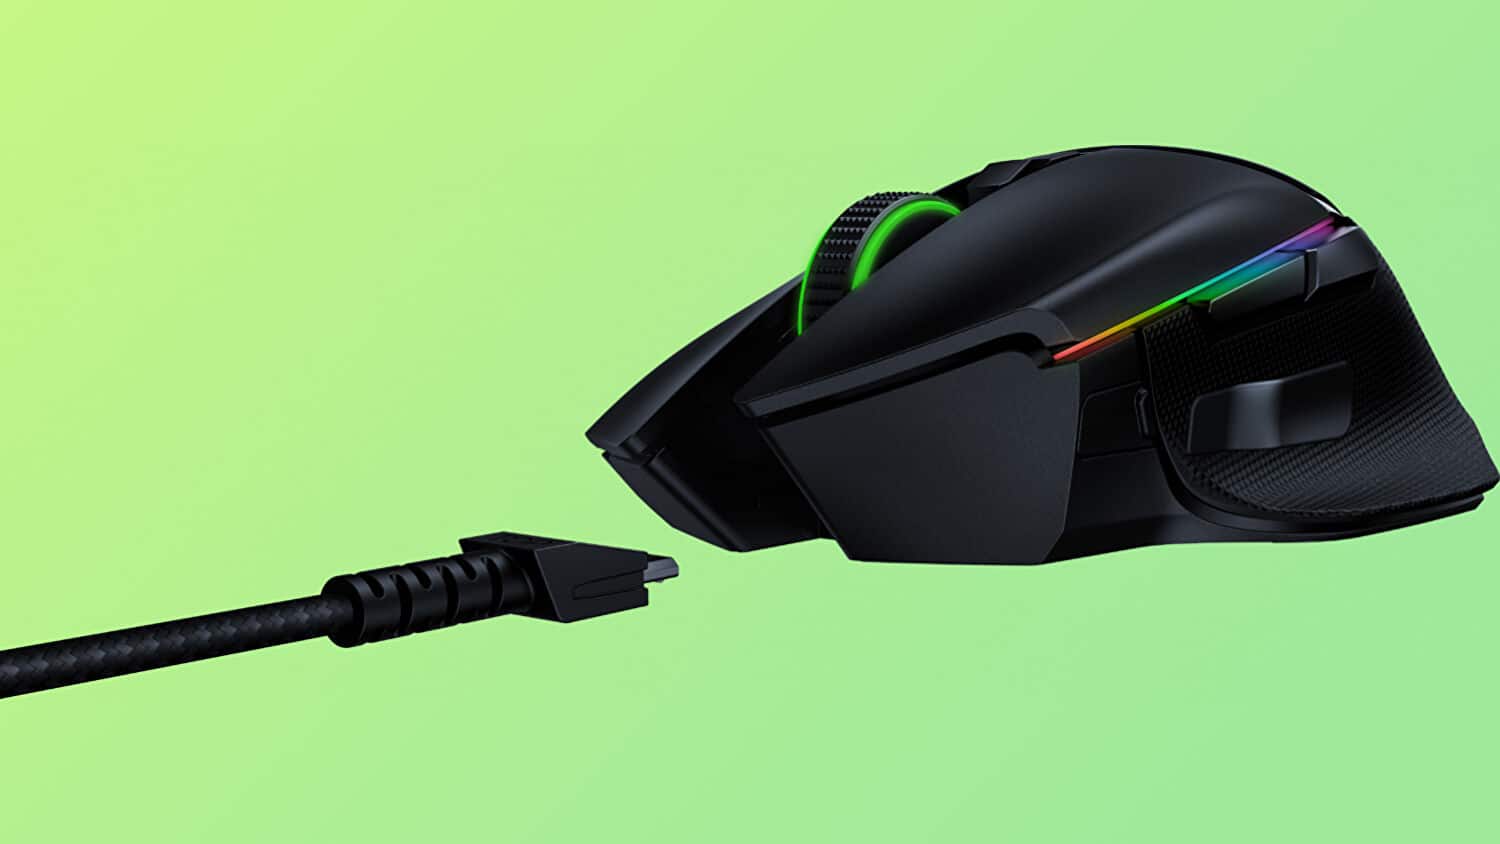 The Razer Basilisk Ultimate Hyperspeed is down to $80 at Amazon ($150 MSRP)